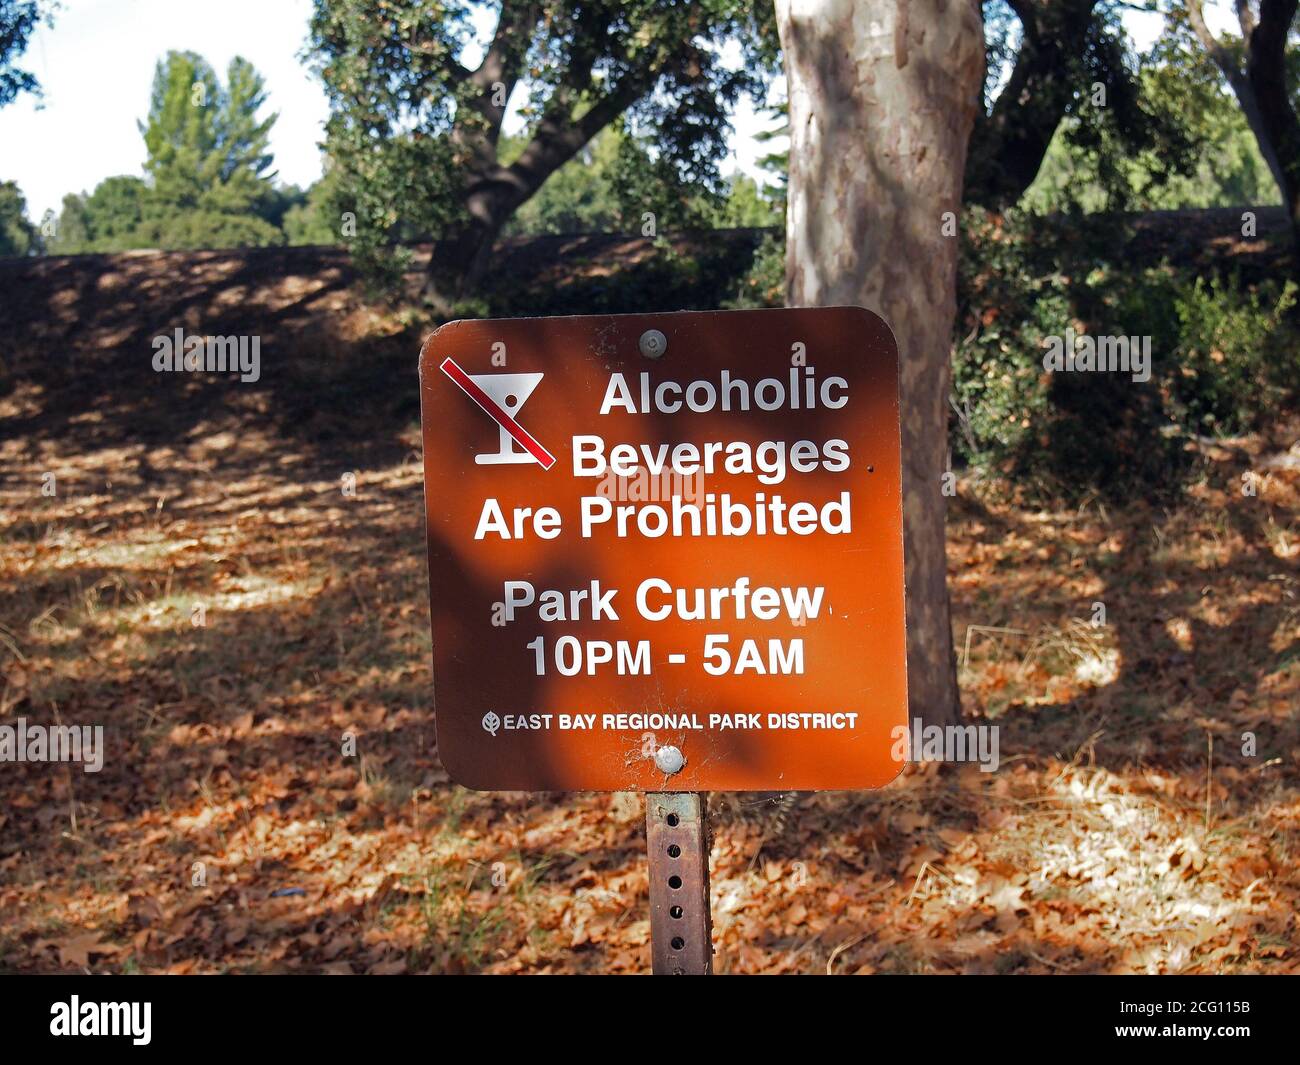 alcoholic beverages prohibited, park curfew Beard Staging Area park hours sign, Alameda Creek Regional Trail, California Stock Photo